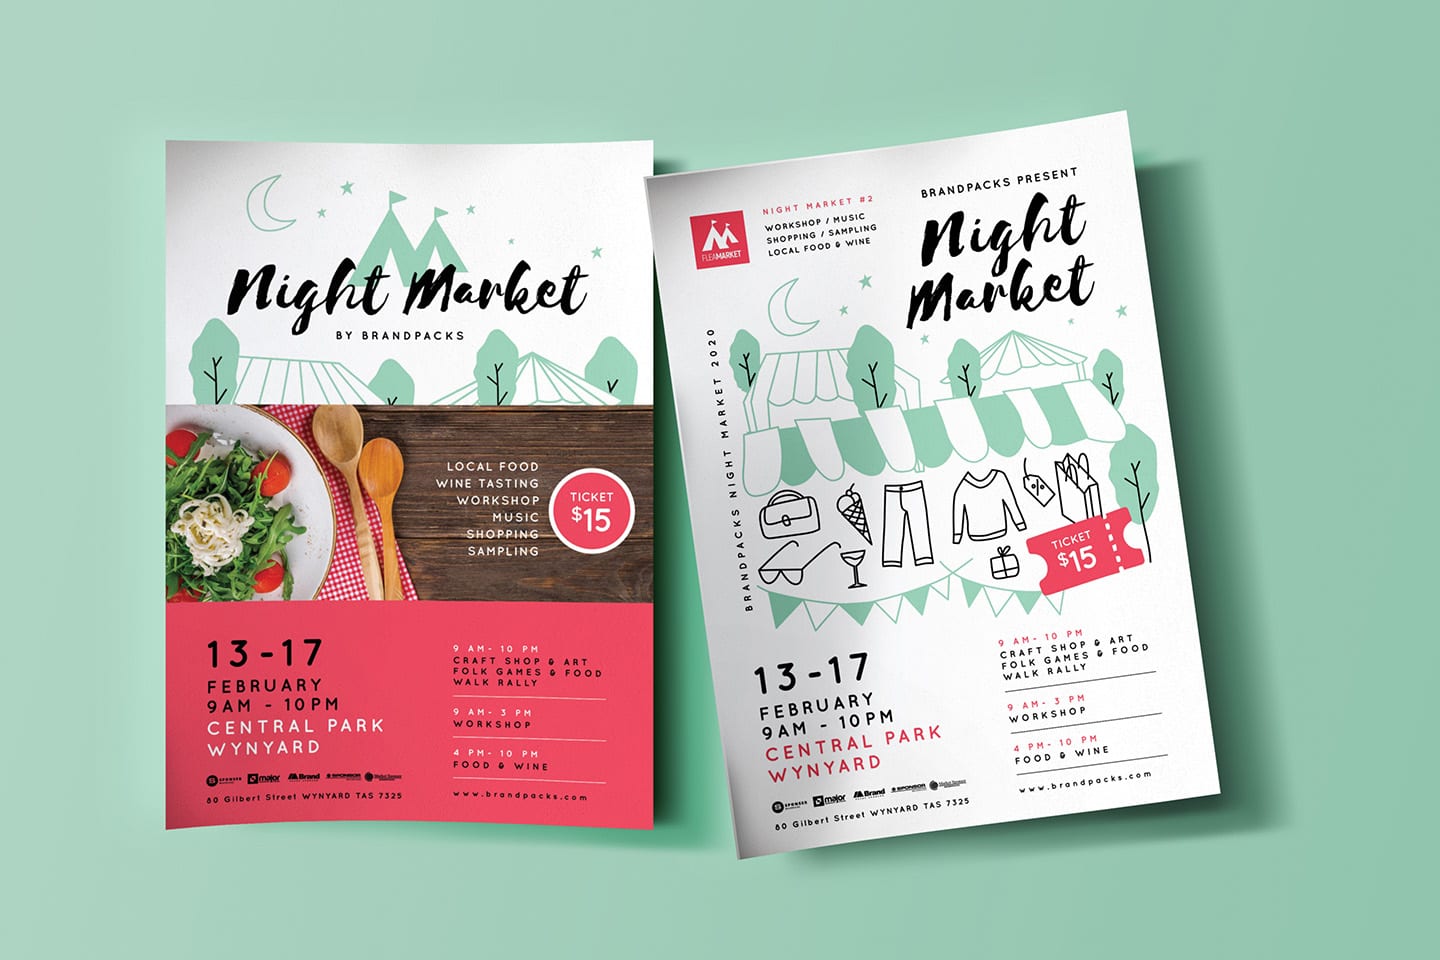 Free Night Market Poster Templates In Psd, Ai & Vector - Brandpacks